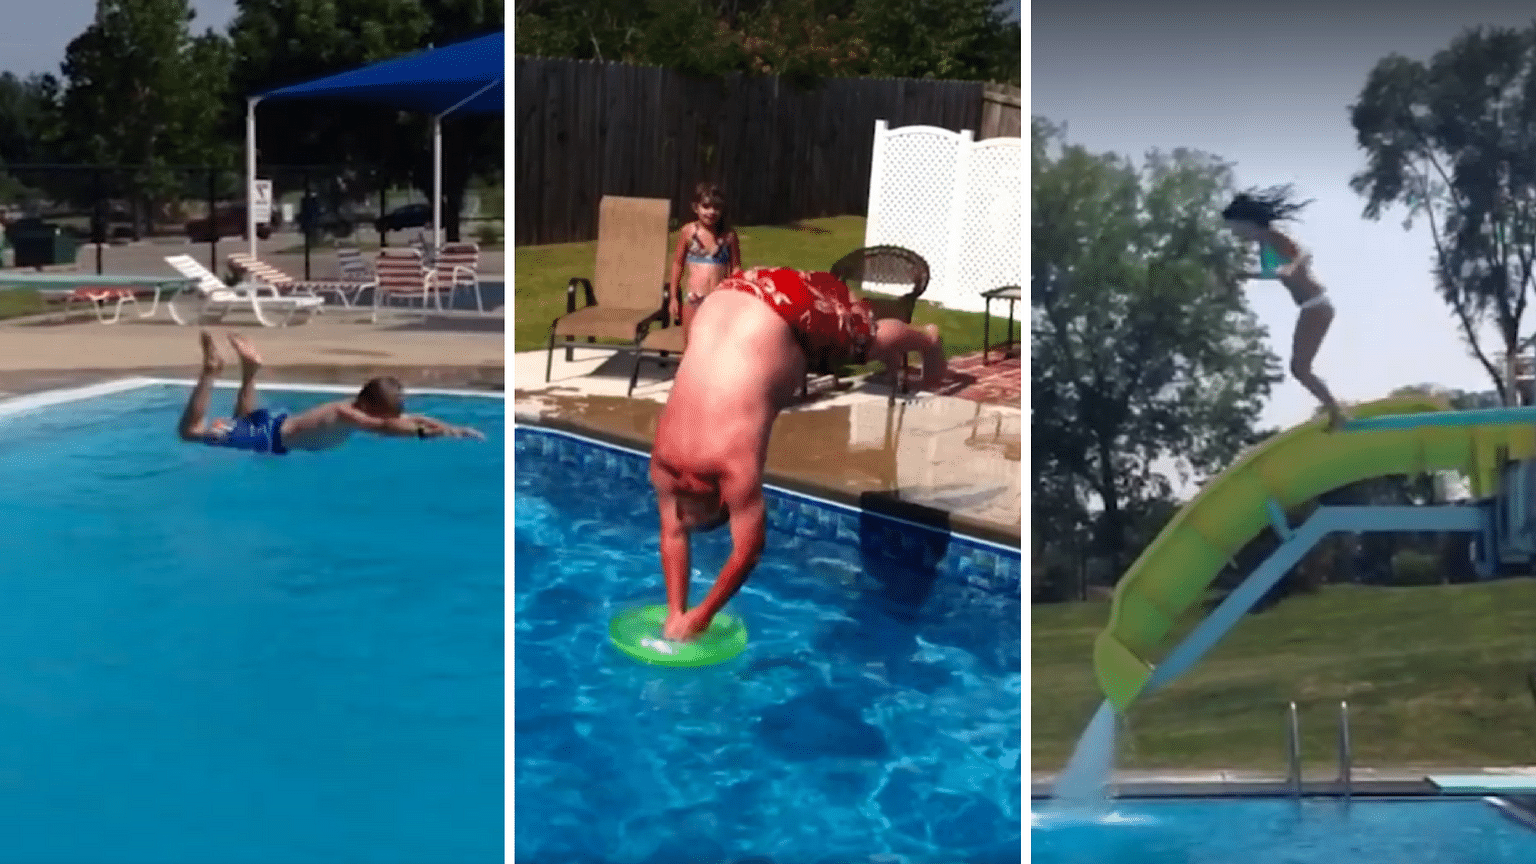 Forget Olympic Diving, Watch These Disastrous Home Videos Instead!